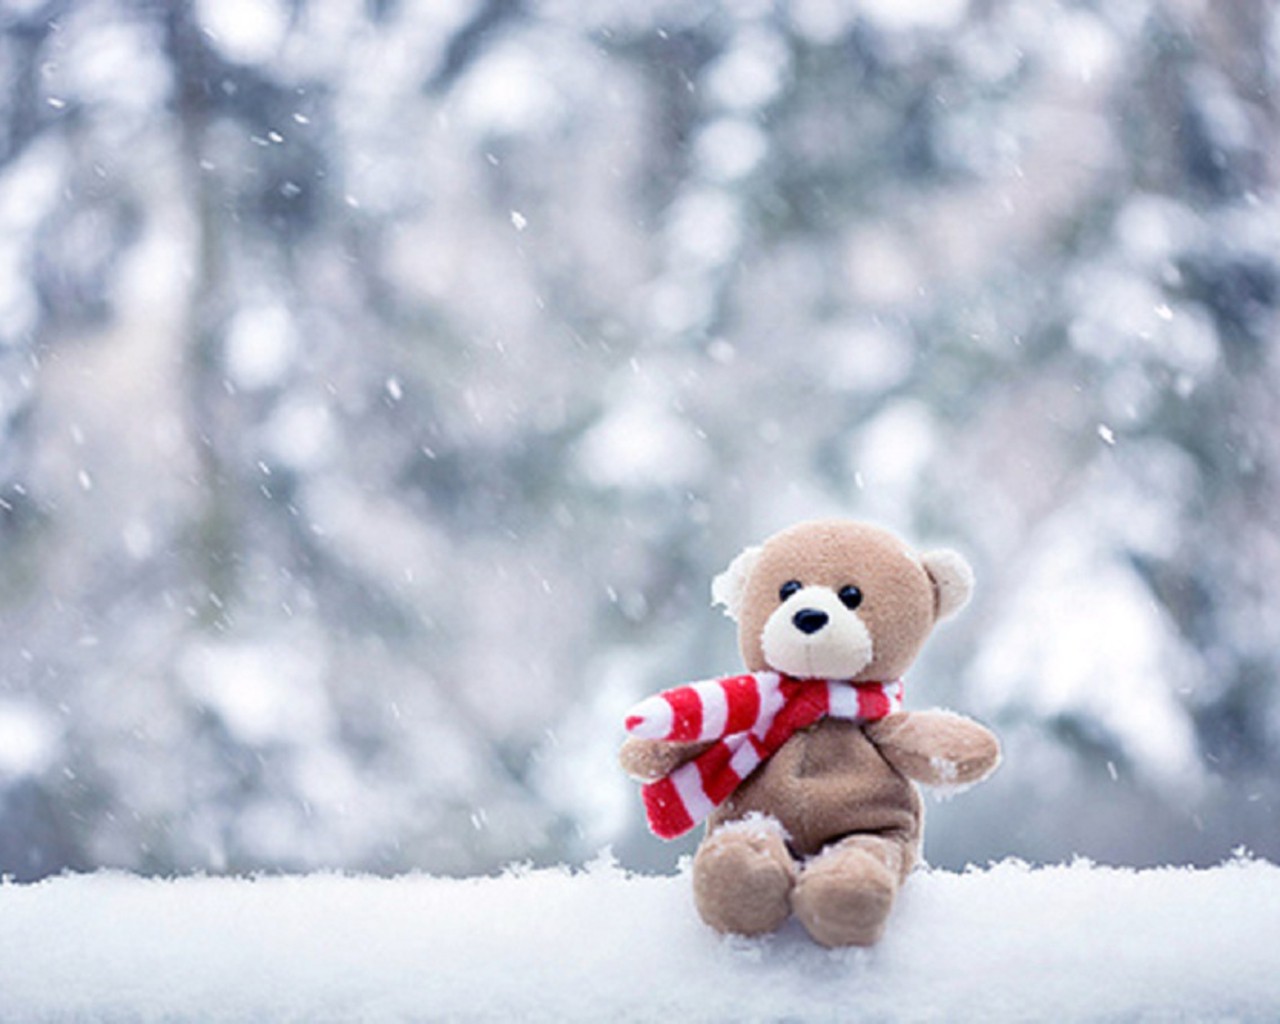 Related To Most Beautiful Teddy Bear Wallpaper